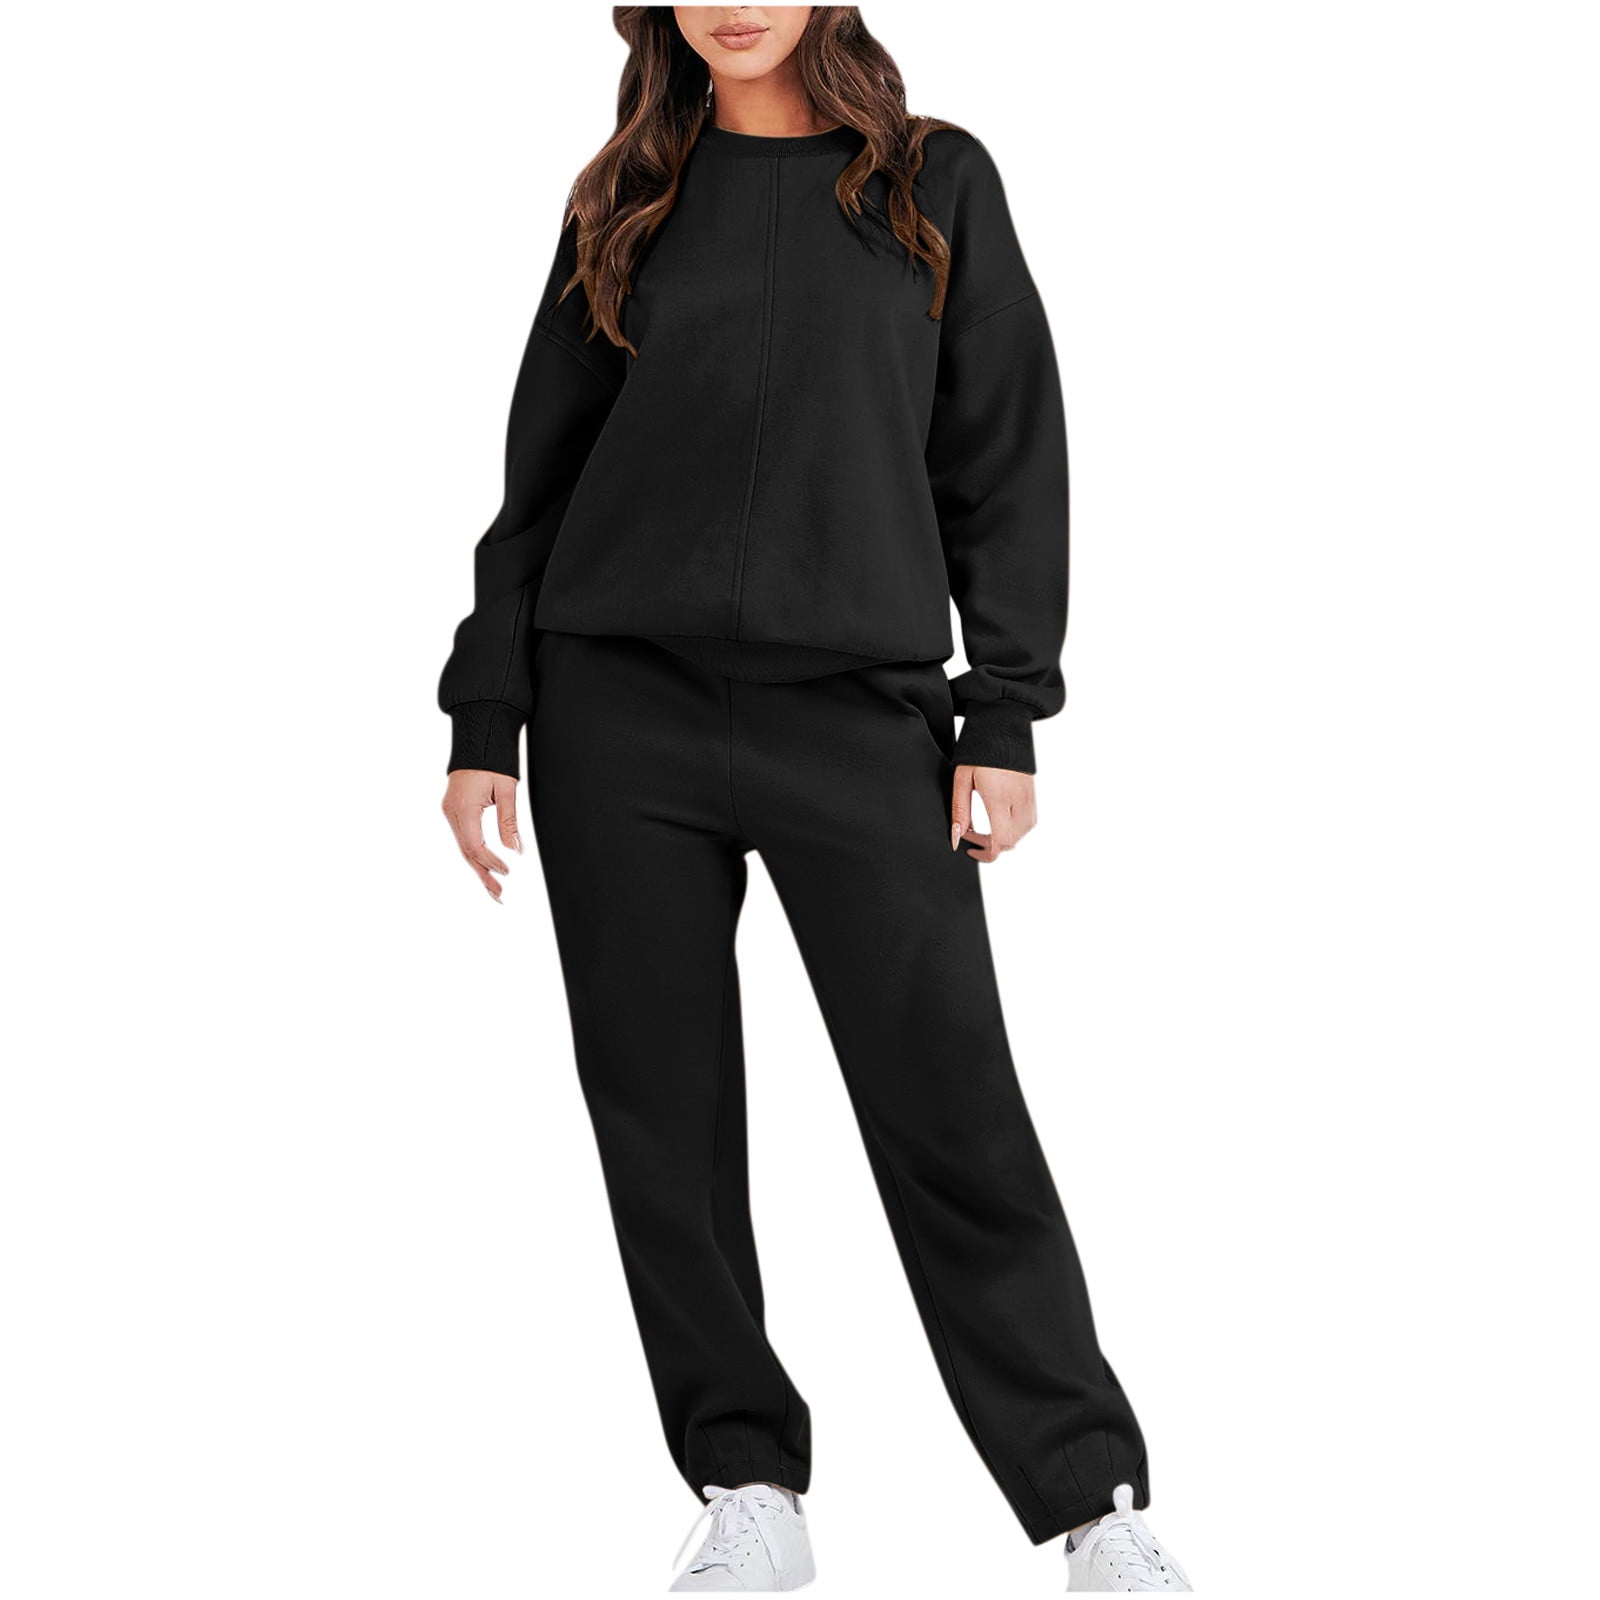 PINSV Women Two Piece Outfits Workout Sets Bodycon Tracksuit Long Sleeve  Zip Up Hoodie Jacket Jogger Matching Sweat Pants Set P56 Black X-Large